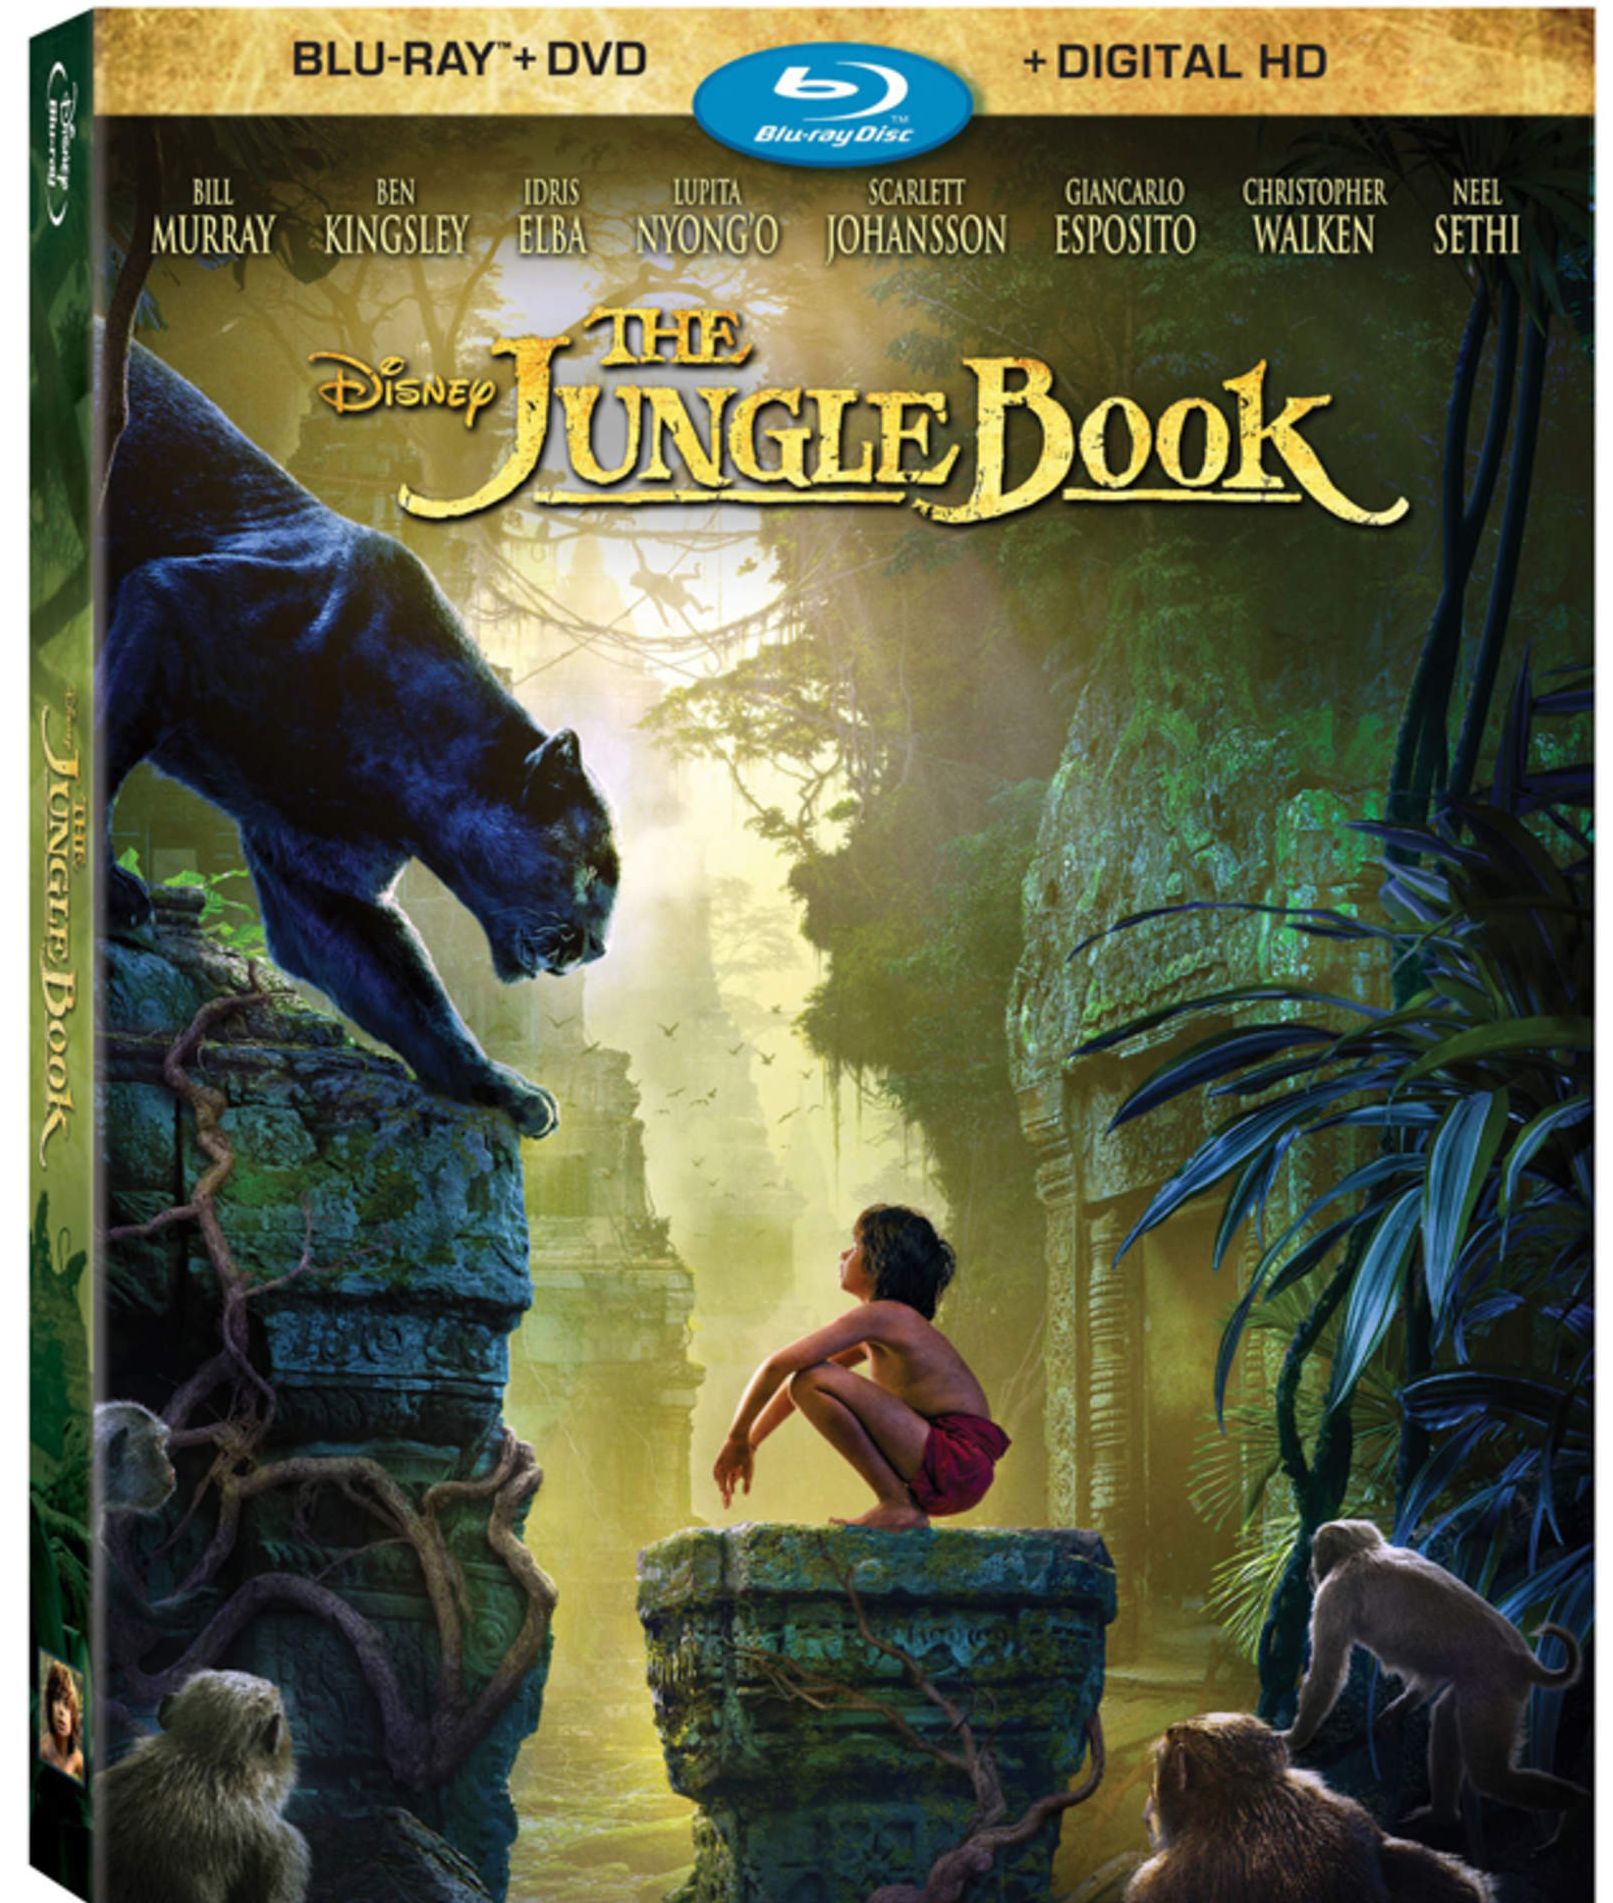 The Jungle Book DVD and Blu Ray out August 30